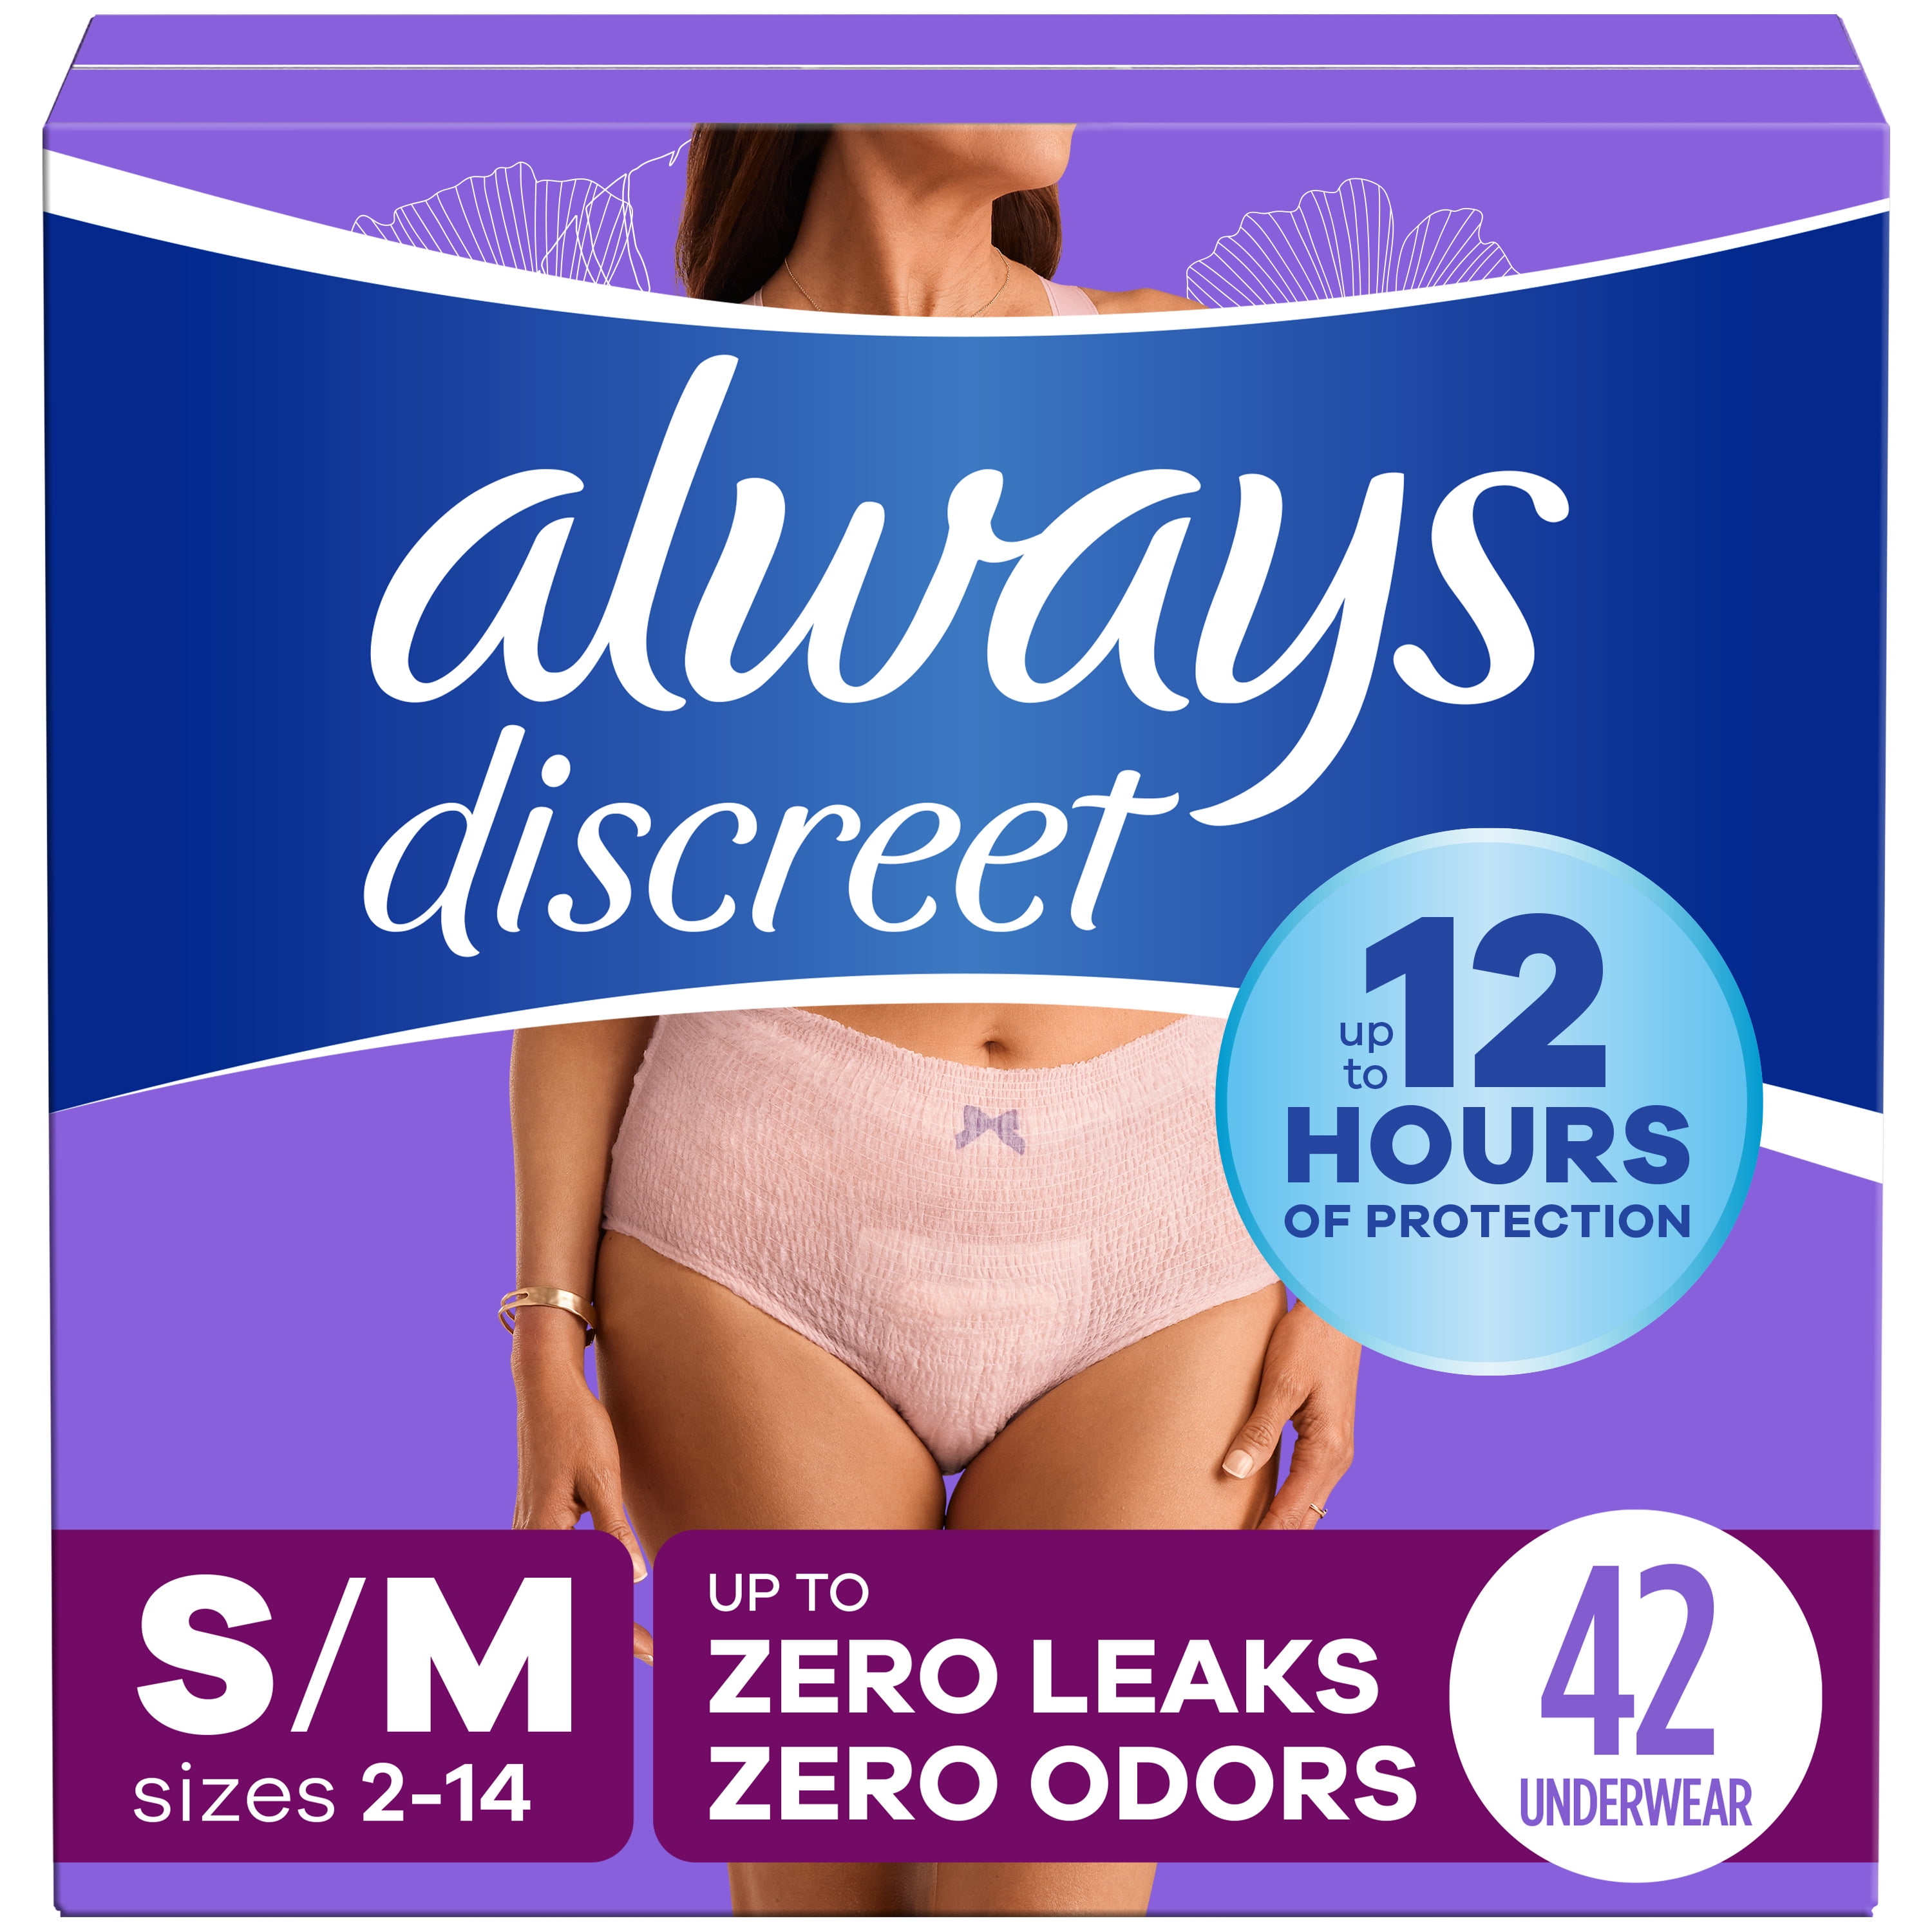 Comfort Fresh Incontinence Products - Convenient, Discreet, Free Shipping